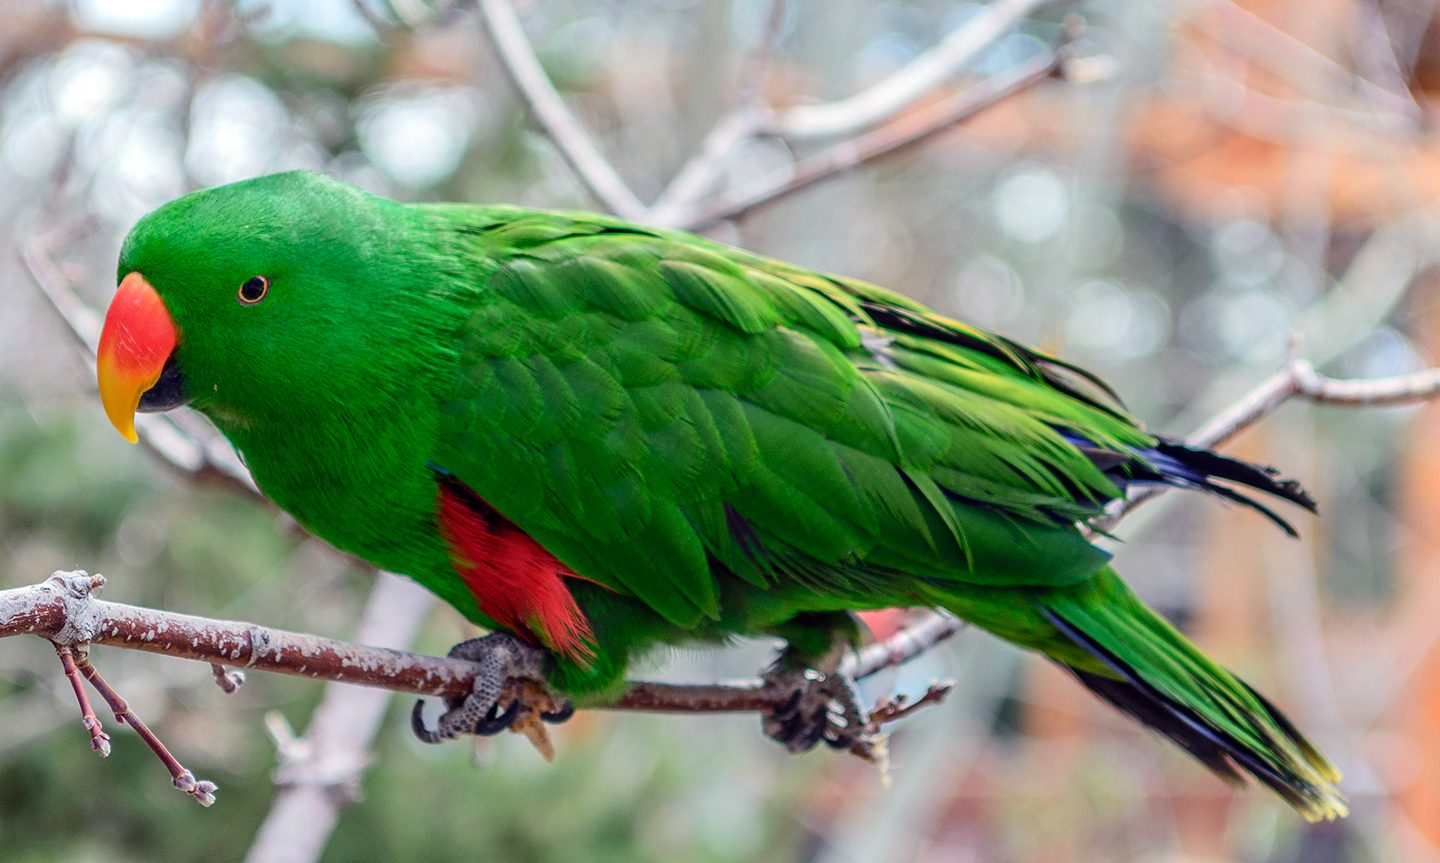 Eclectus parrot 'Mister' sitanding on a branch